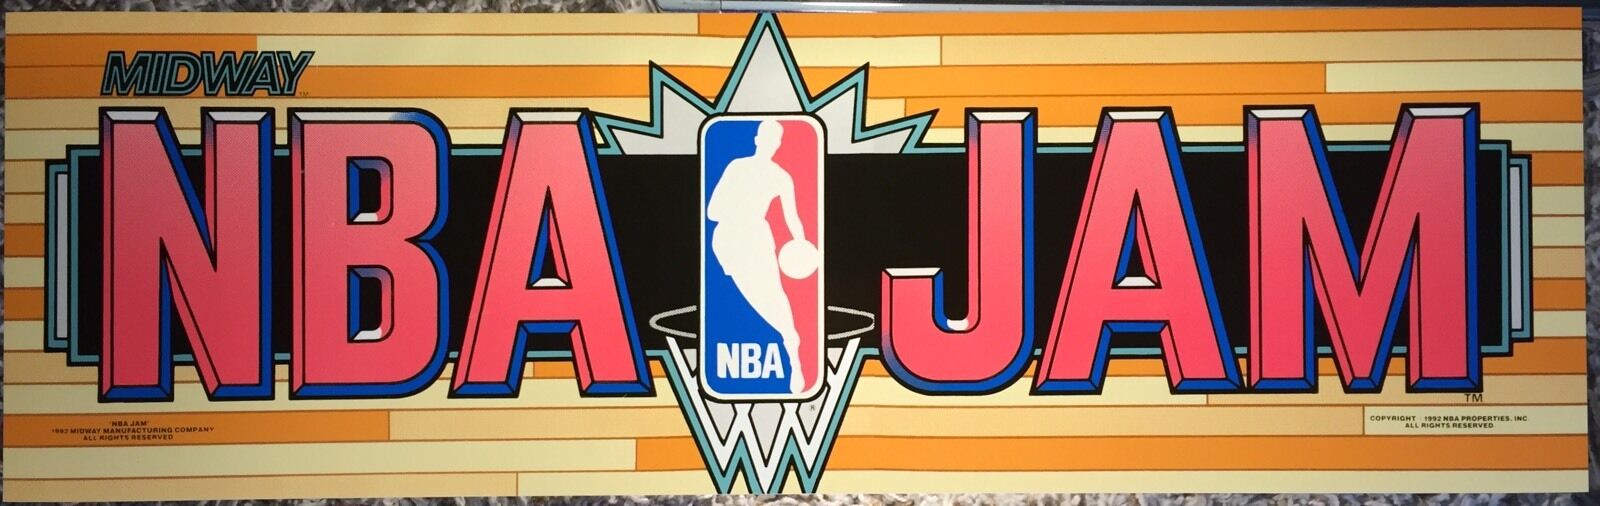 NBA Jam Arcade Marquee by Midway 26\